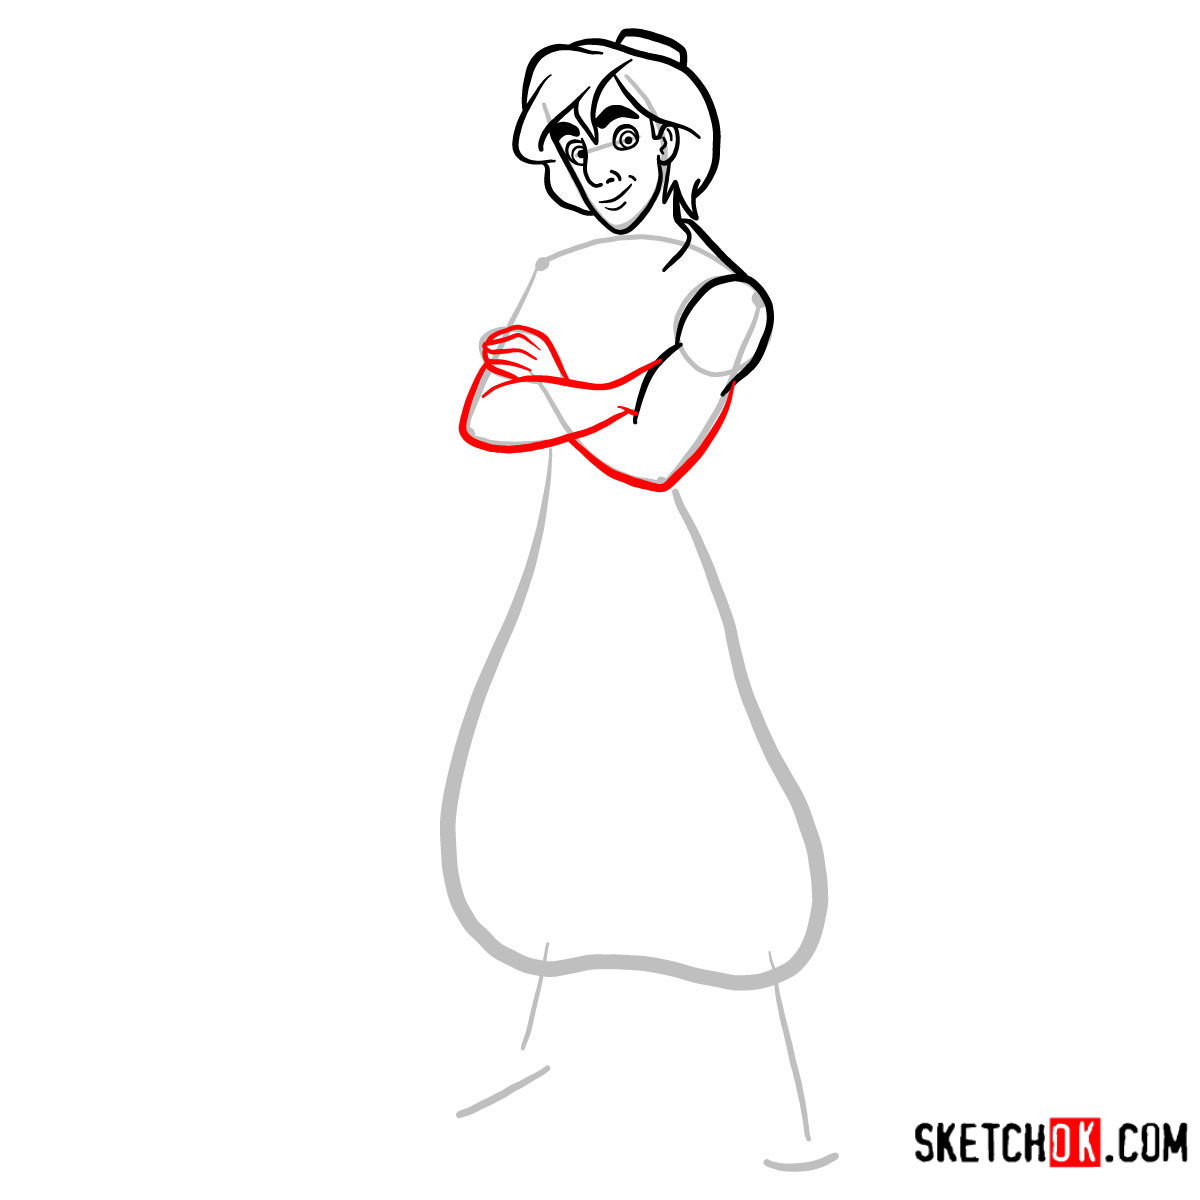 How to draw Aladdin from Disney's animated series - step 06